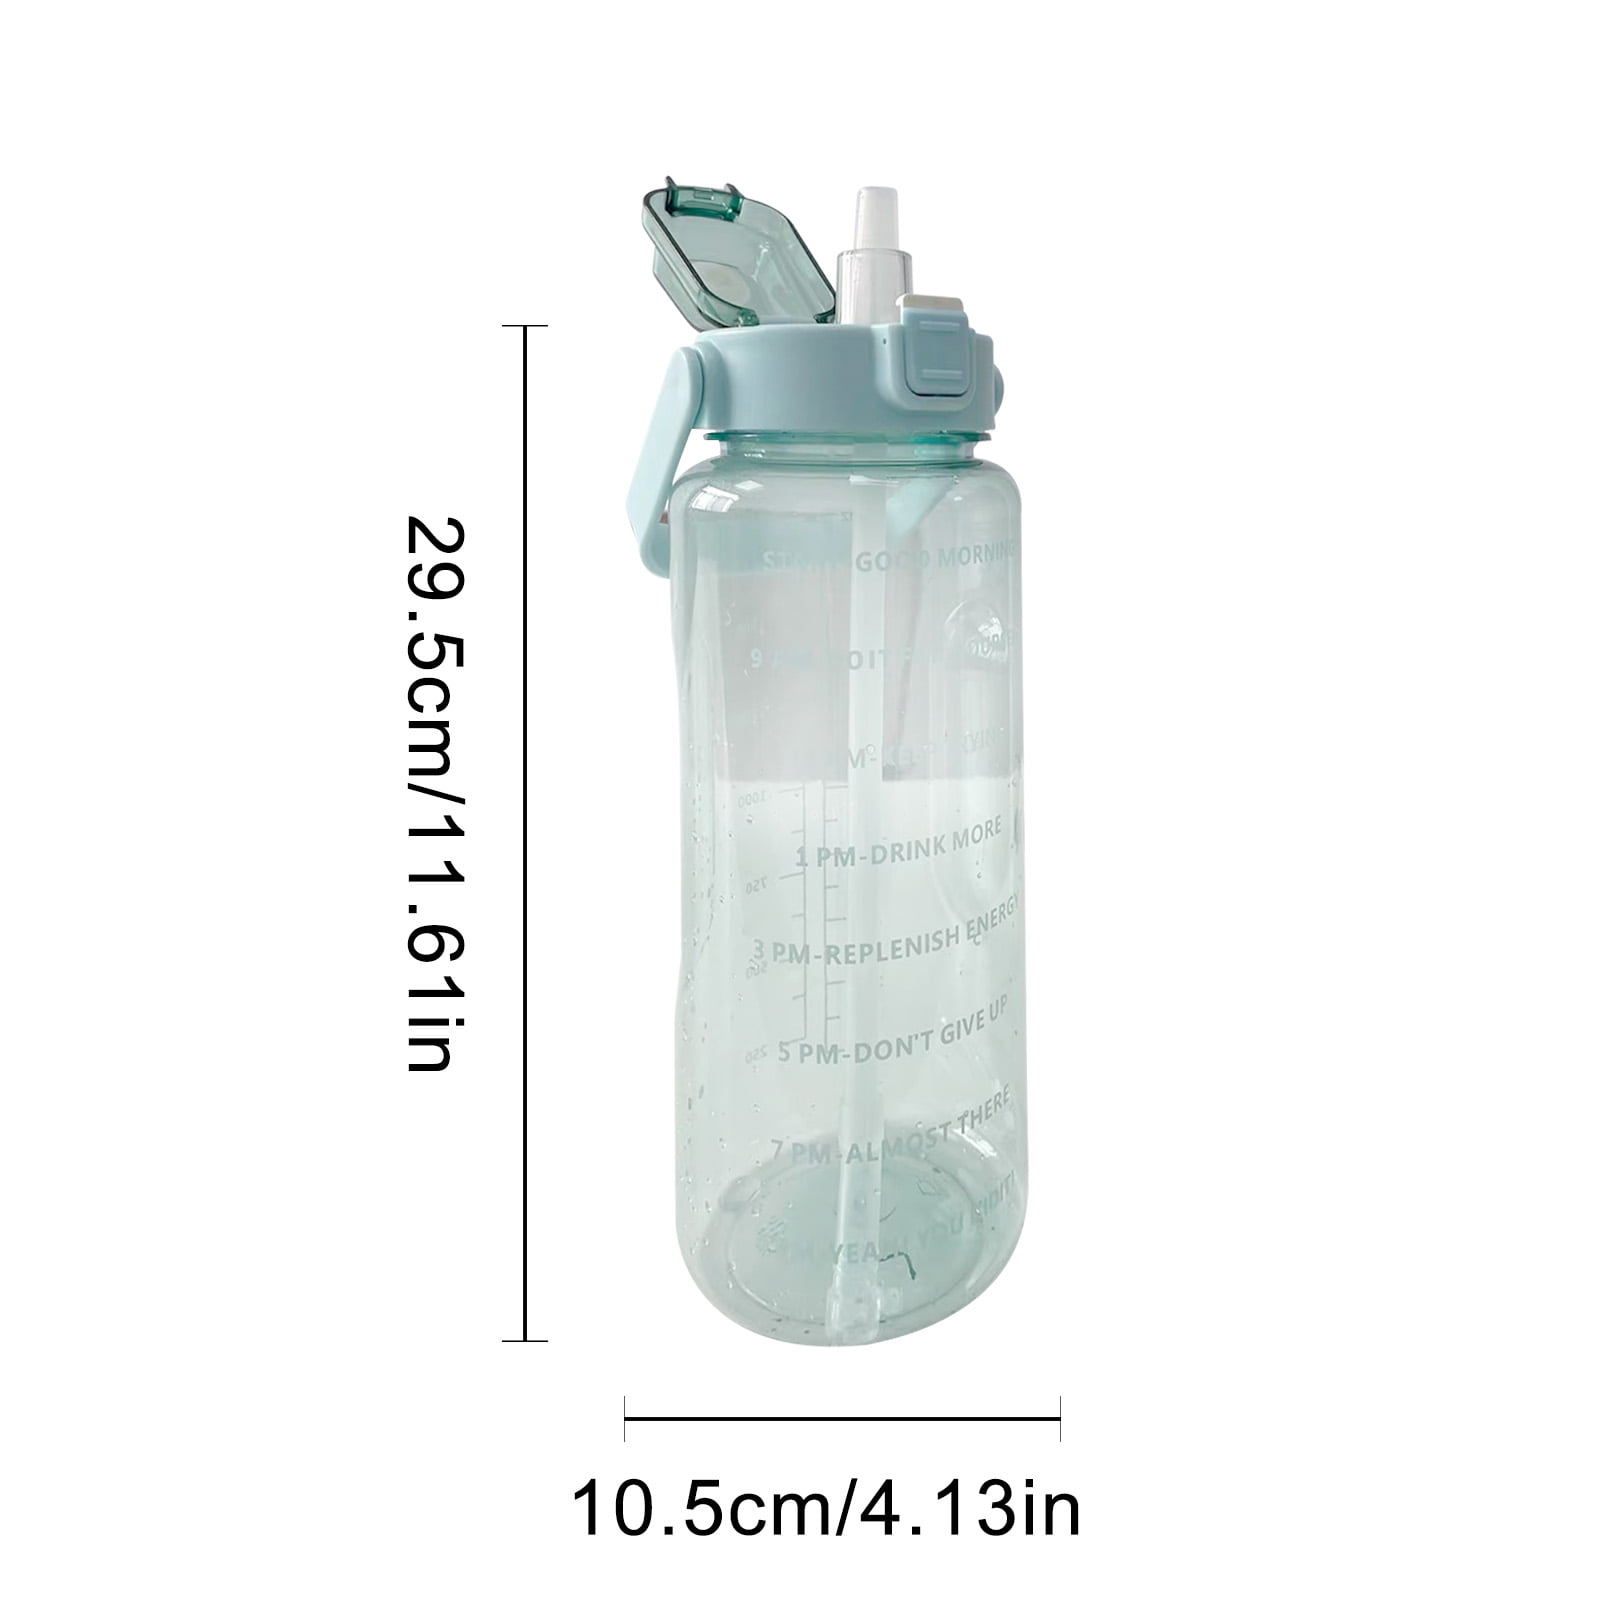 Motivational Water Bottle For Girls 2L Capacity With Time Marker, Straw,  And Portable Design Perfect For Sports, Gym, And More By Botella De Agua.  From Ning09, $10.28